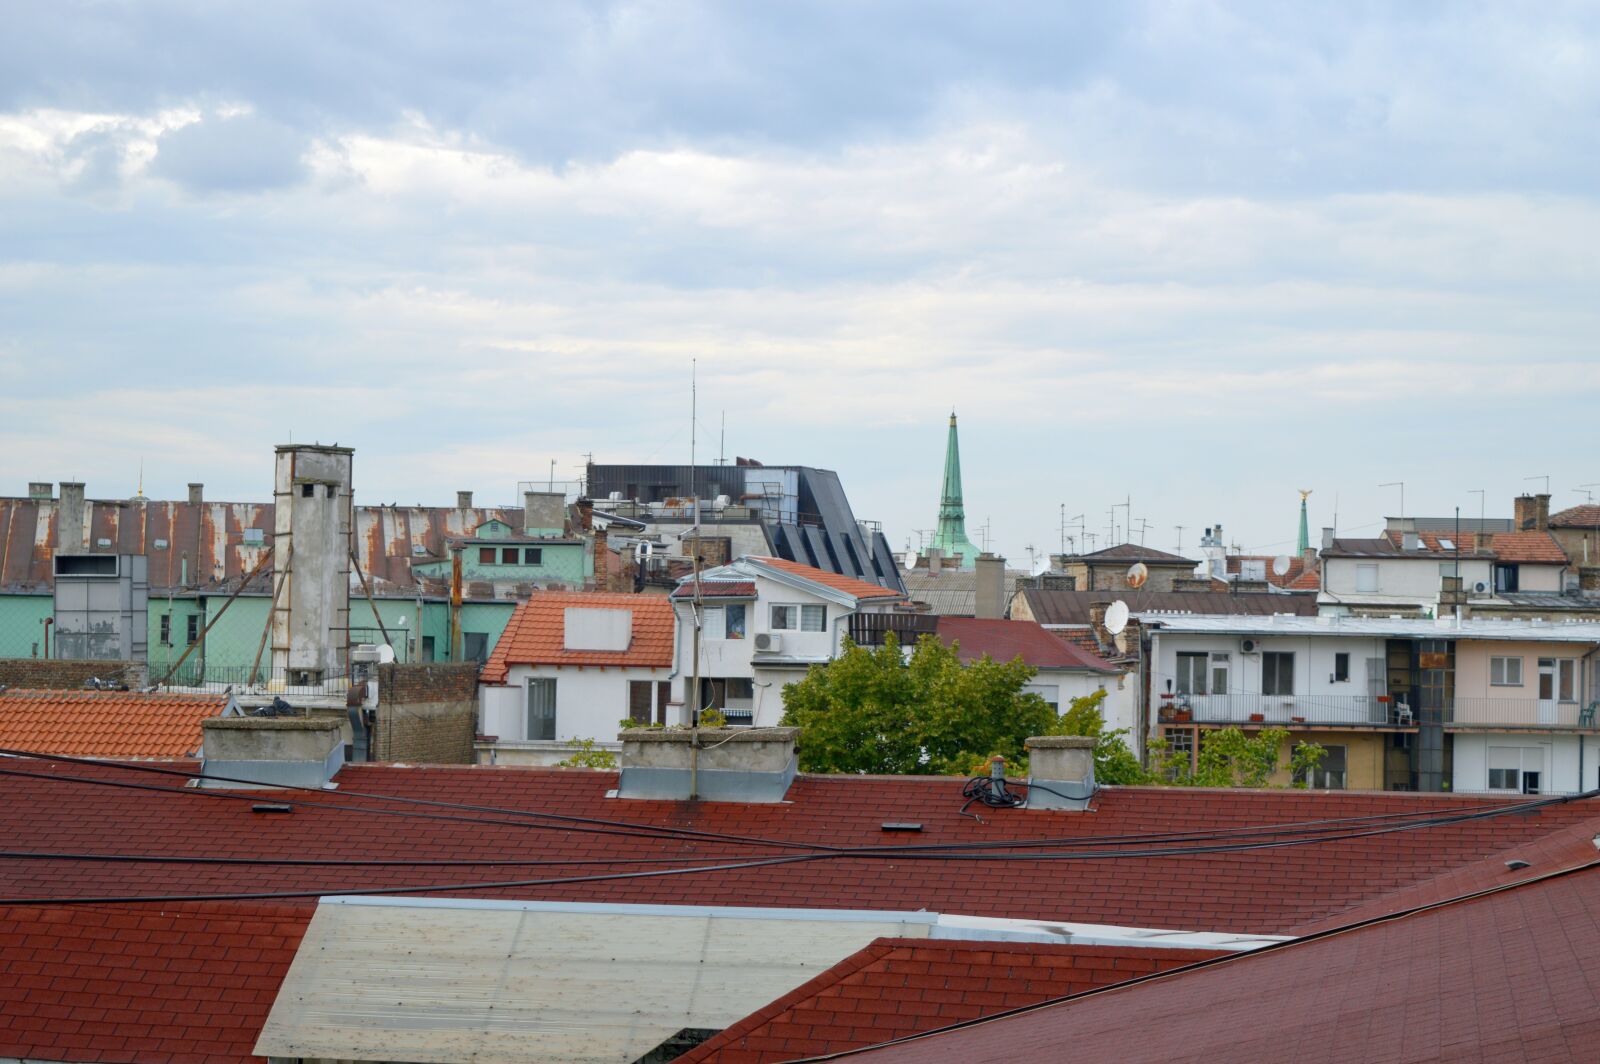 Nikon D3200 sample photo. "City, roofs, architecture" photography